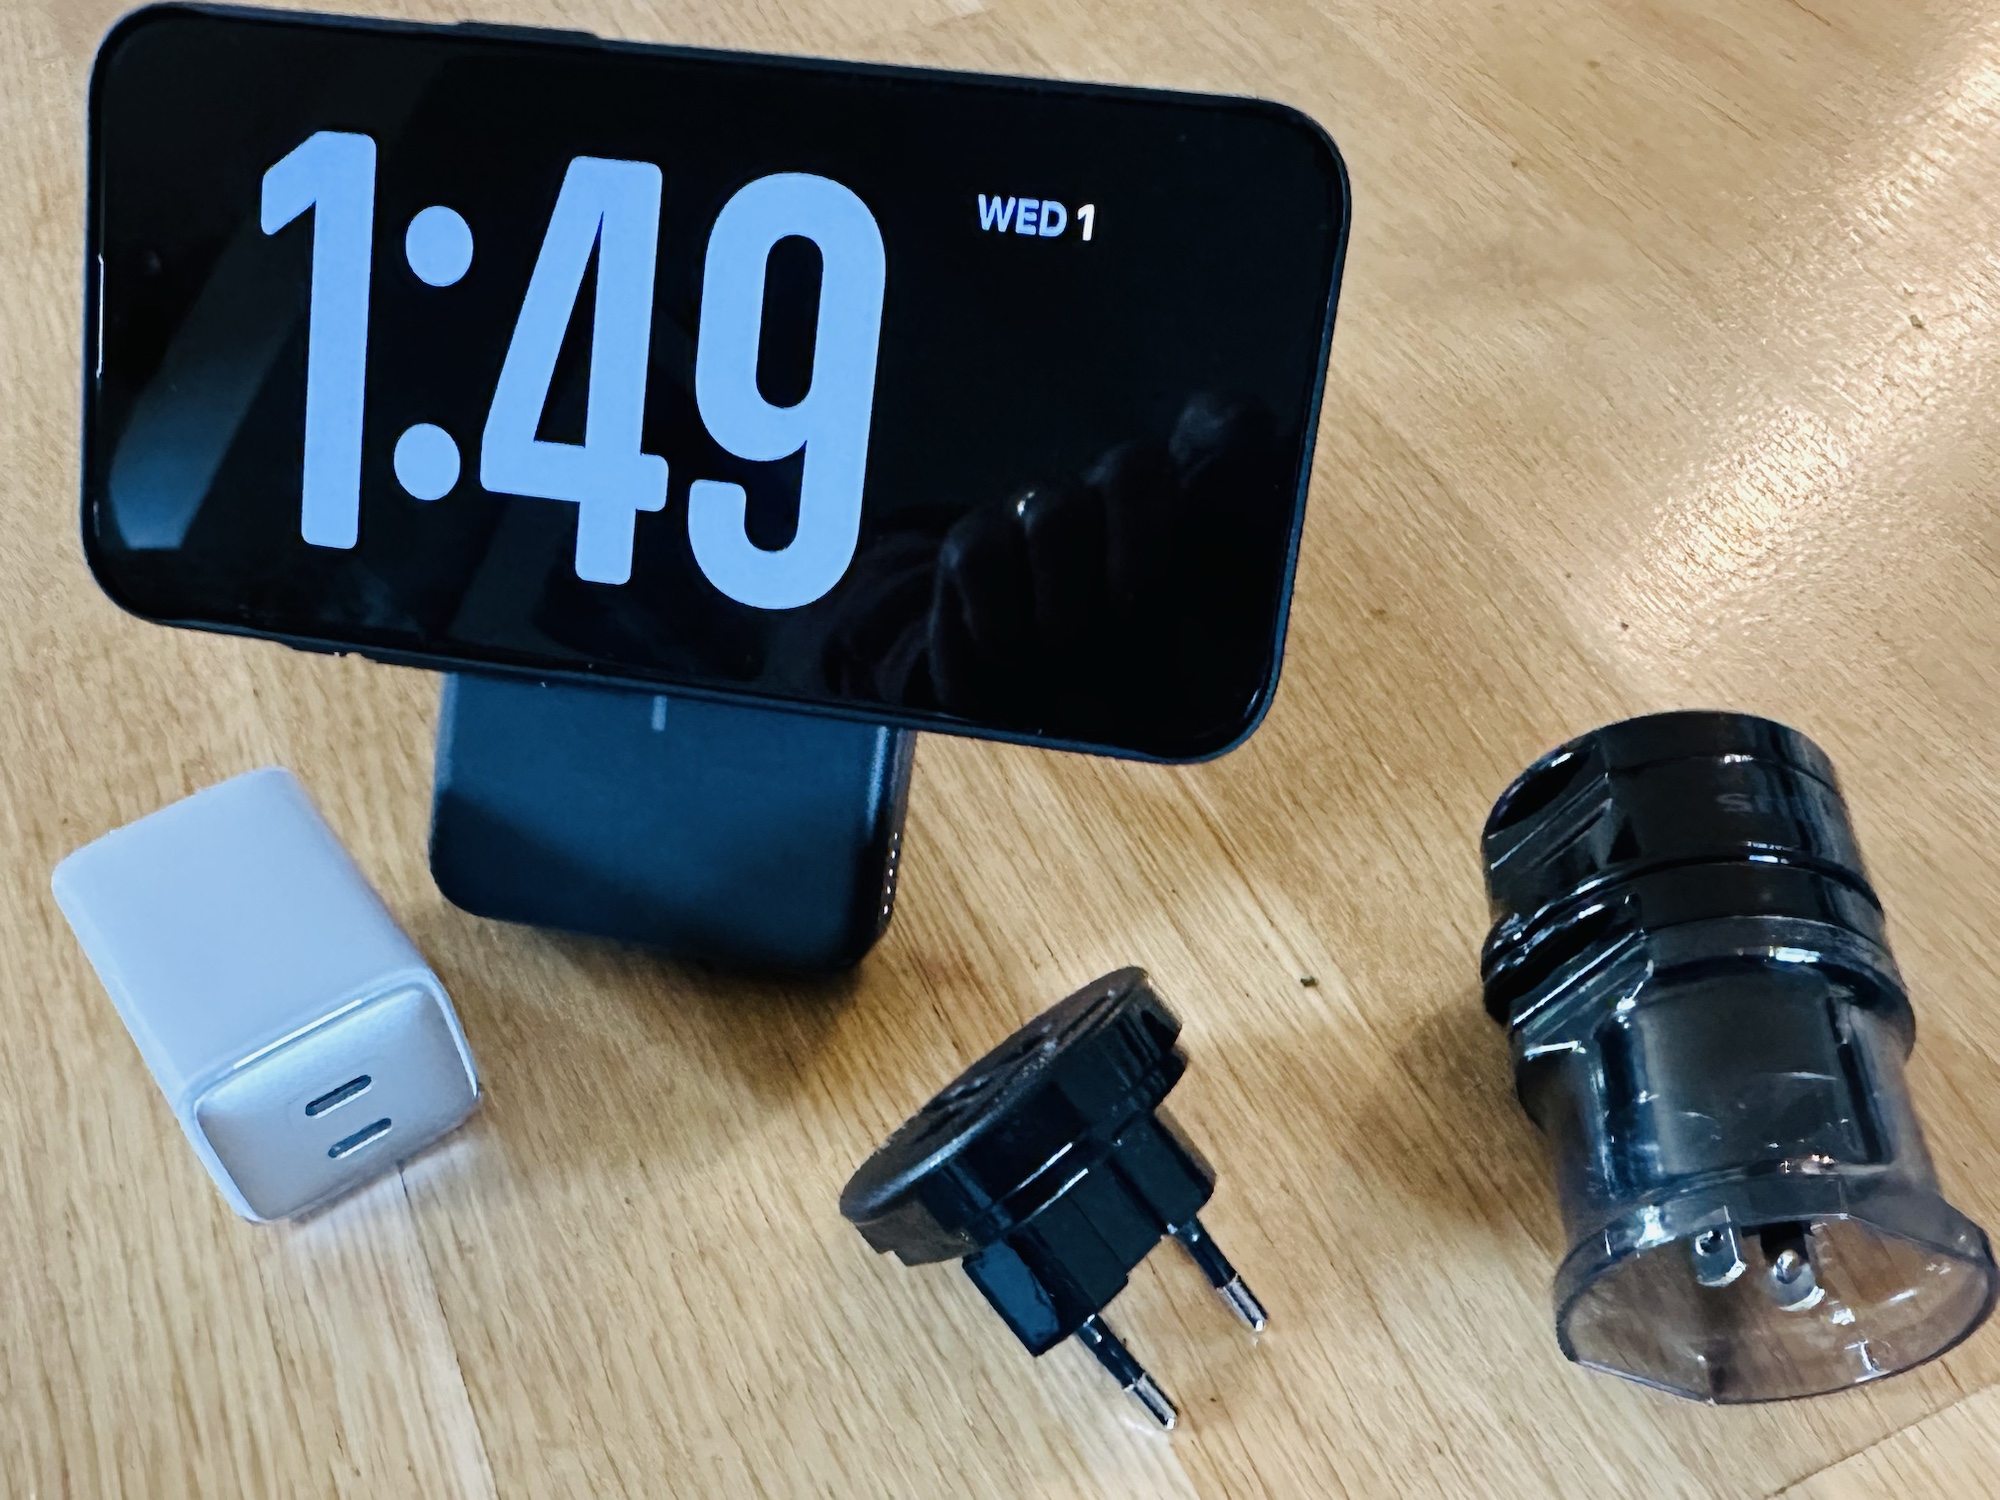 a digital clock and charger on a table